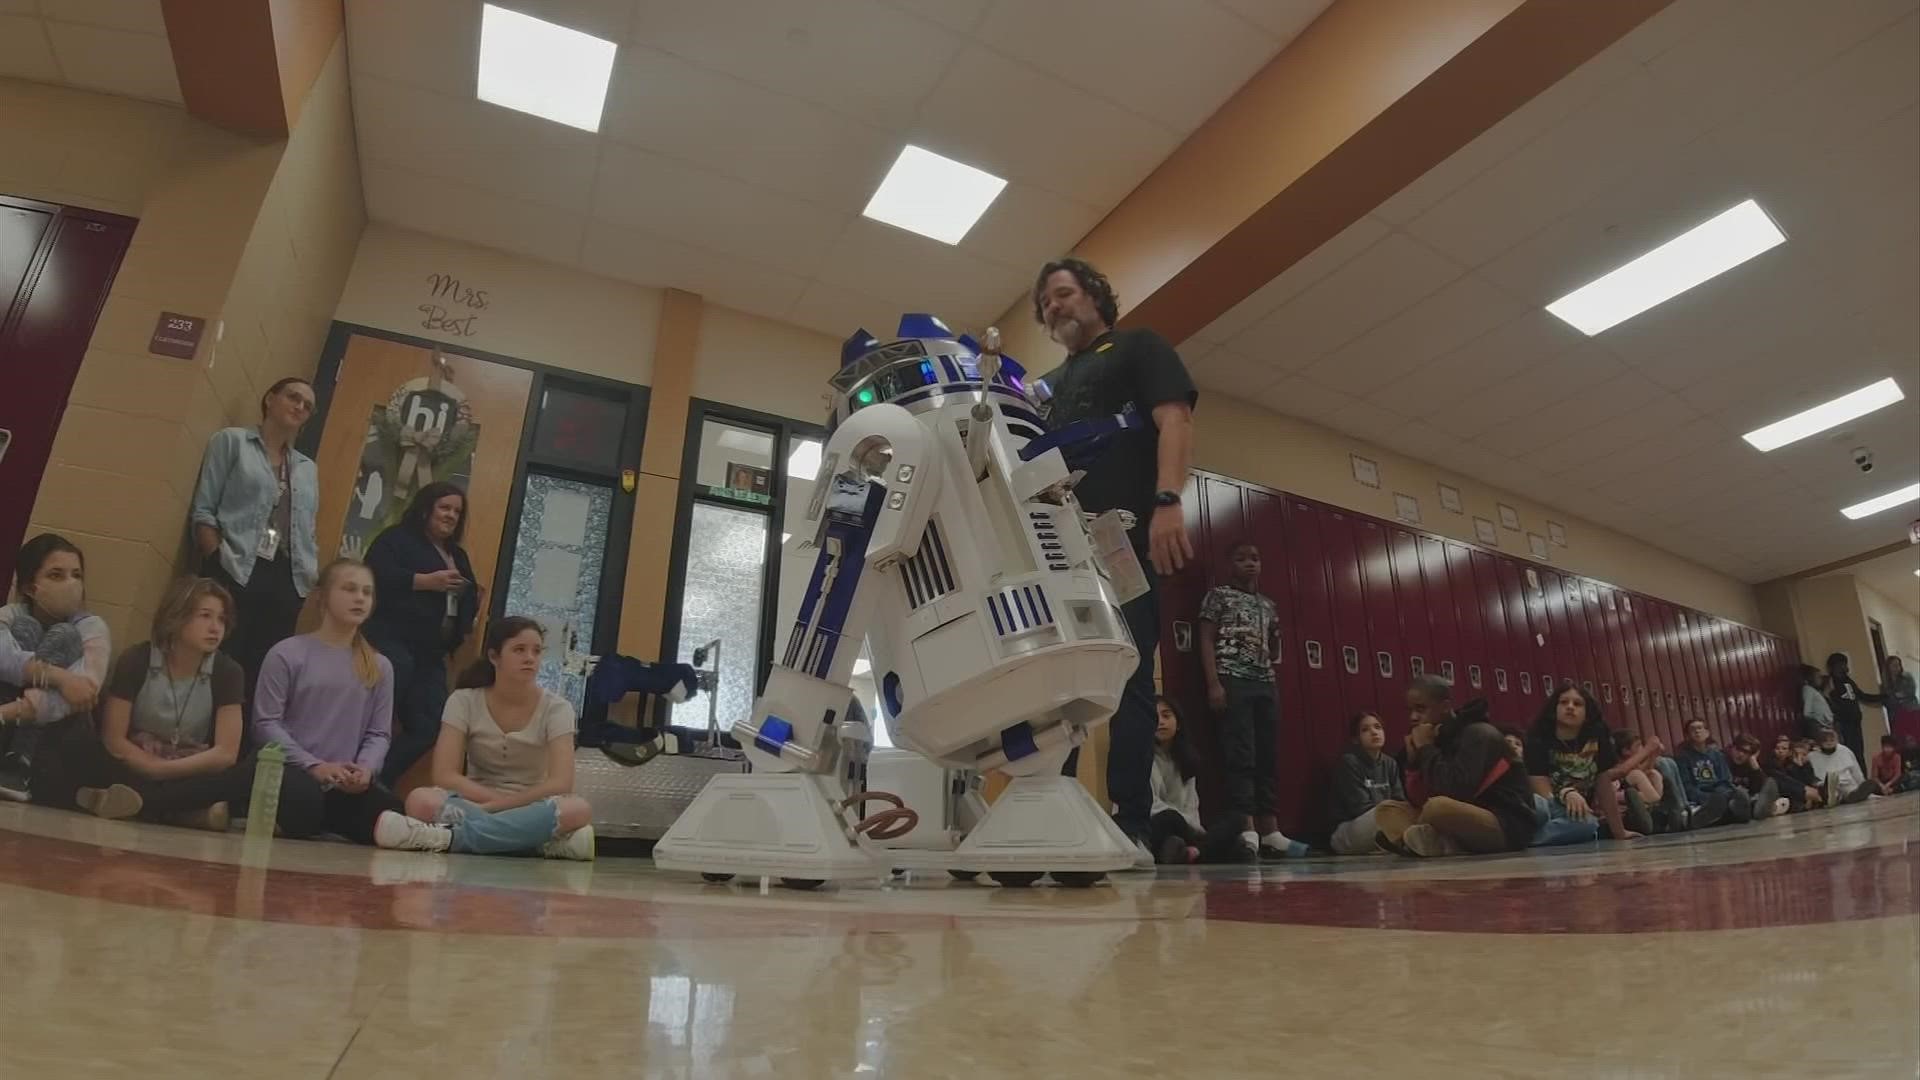 Douglas Bickert built a life-sized R2-D2 droid to discuss bullying with kids and how they can overcome bullying and adversity.